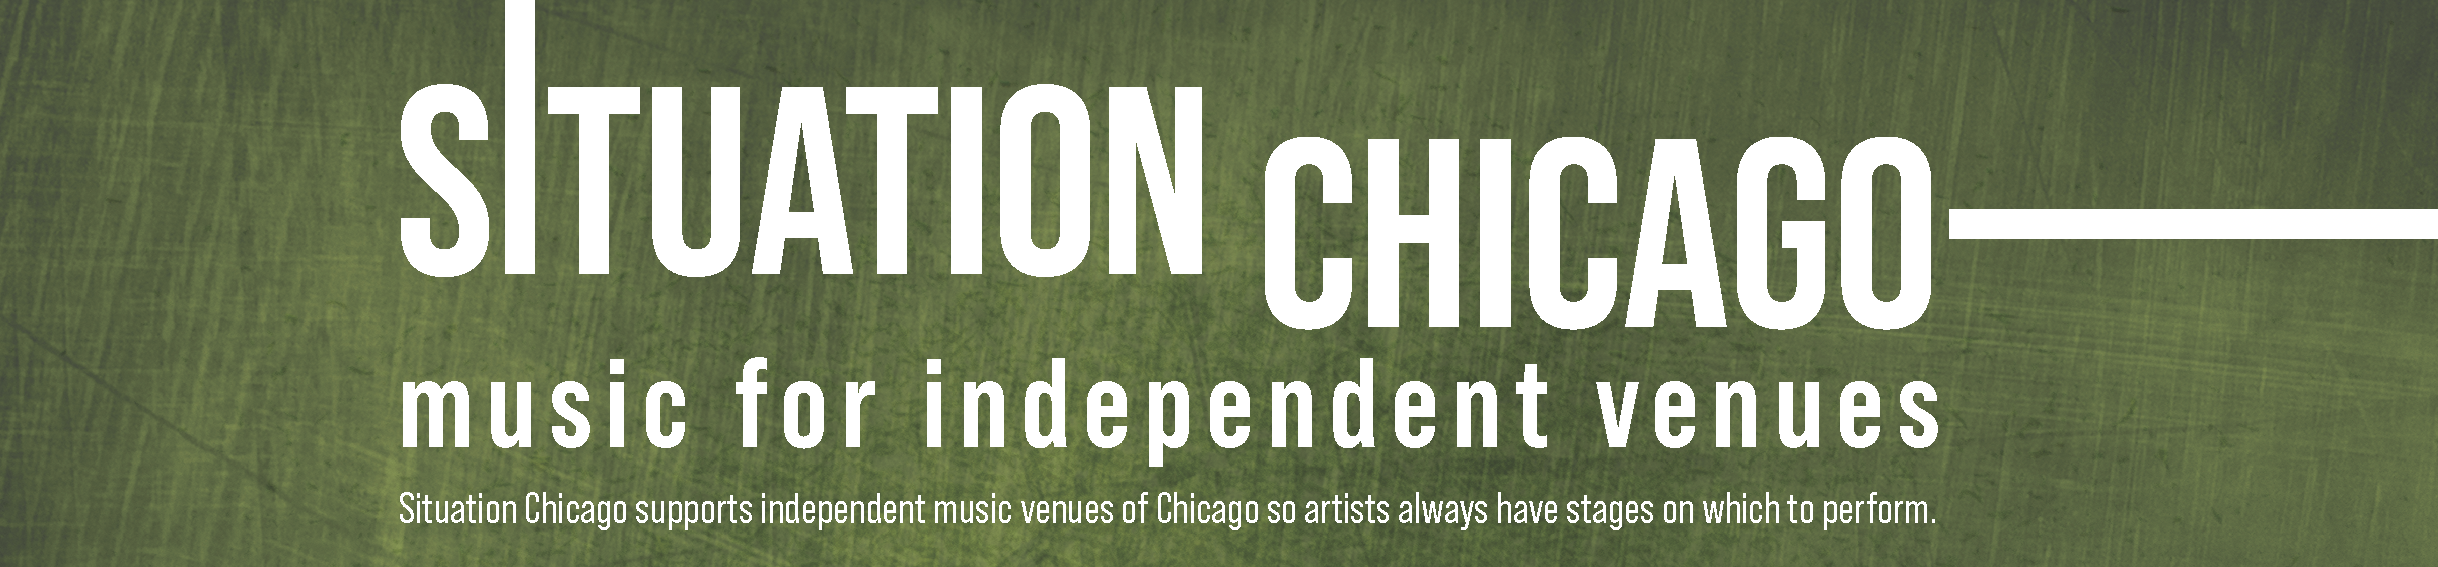 Copy of 11298_Situation Chicago_green banner with phrase